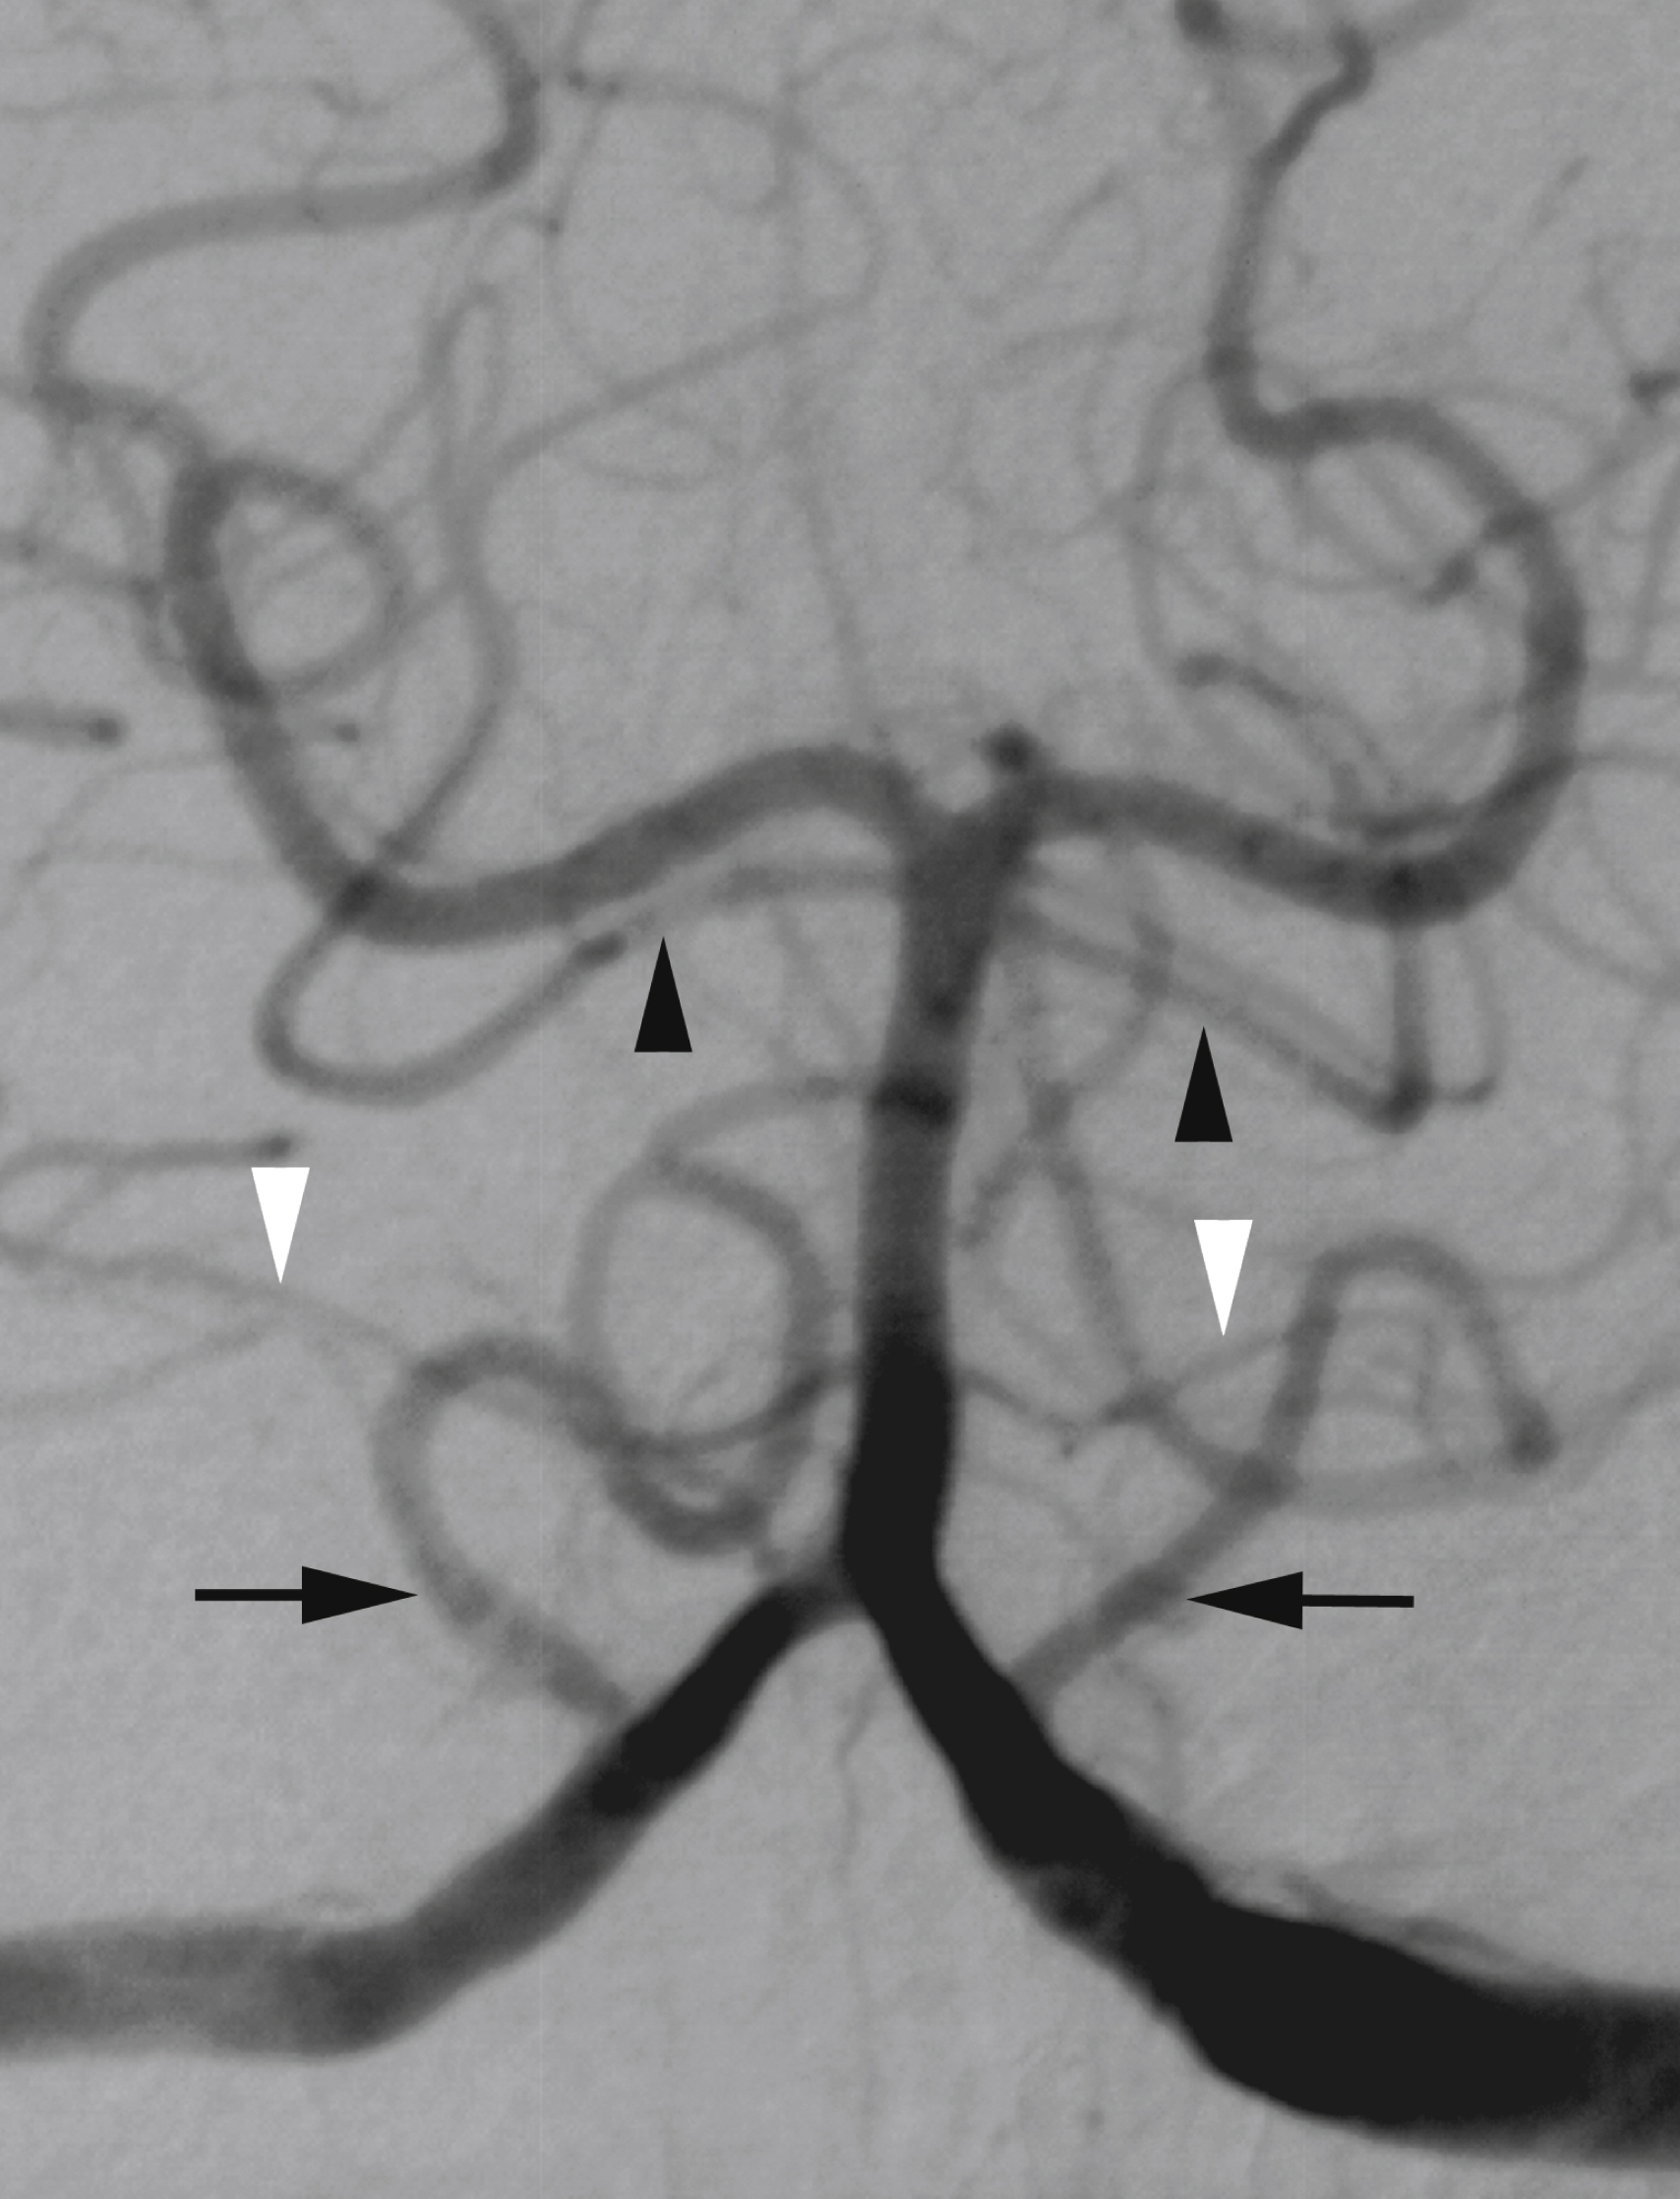 Fig. 56.12, Digital subtraction angiogram, left vertebral artery (VA) injection, anteroposterior view. Basilar artery is formed by junction of the two VAs. It ends in proximal portion of both proximal cerebral arteries (P1 segment). Posterior inferior cerebellar artery ( black arrows ), anterior inferior cerebellar artery ( white arrowheads ), and superior cerebellar artery (SCA) ( black arrowheads ) are documented. Note duplication of left SCA, which corresponds to separate origins of its vermian and hemispheric branches.